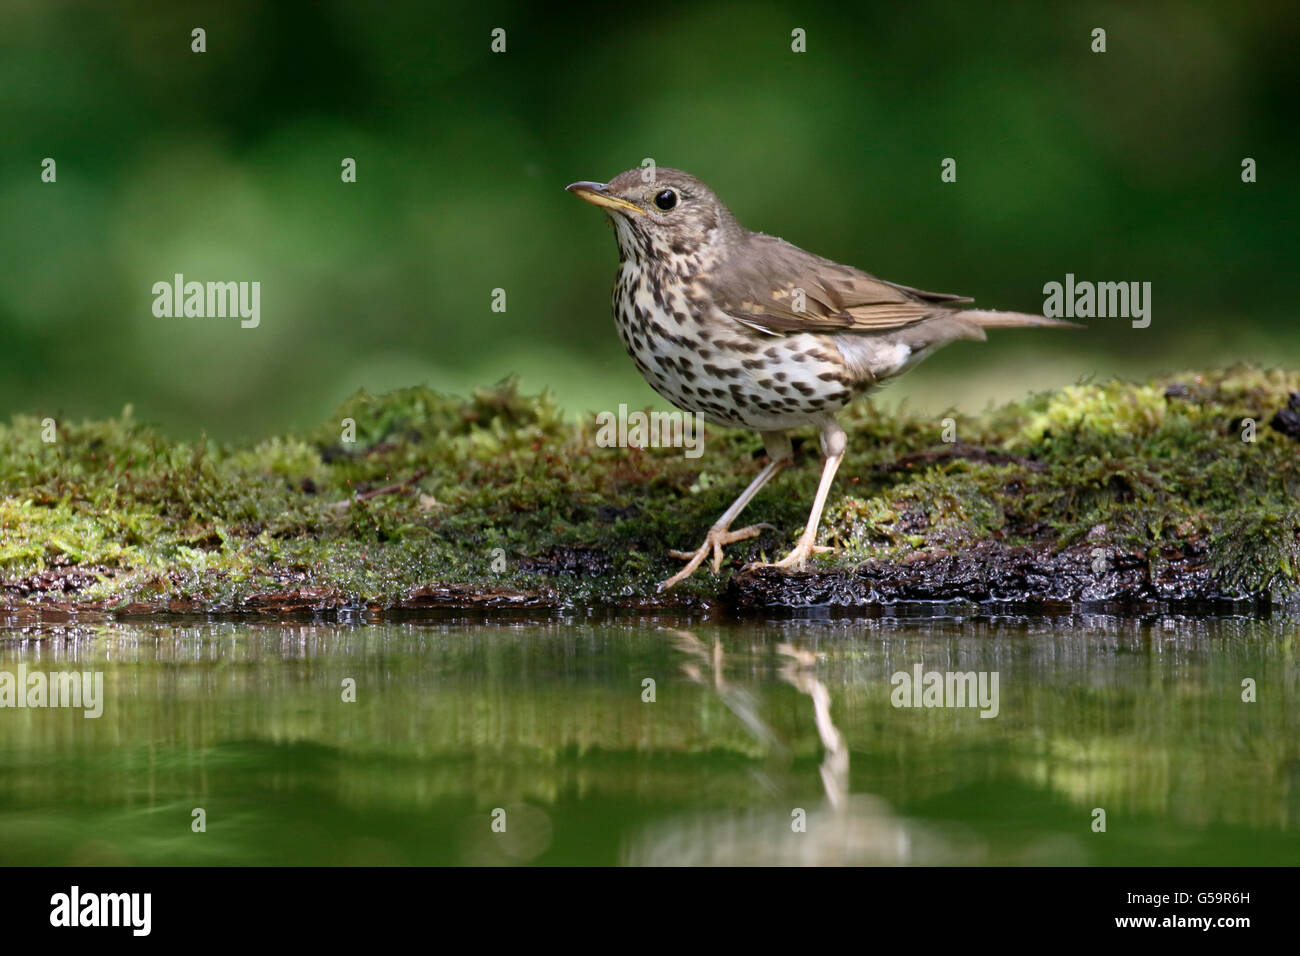 Song thrush, Turdus philomelos, single bird by water, Hungary, May 2016 Stock Photo